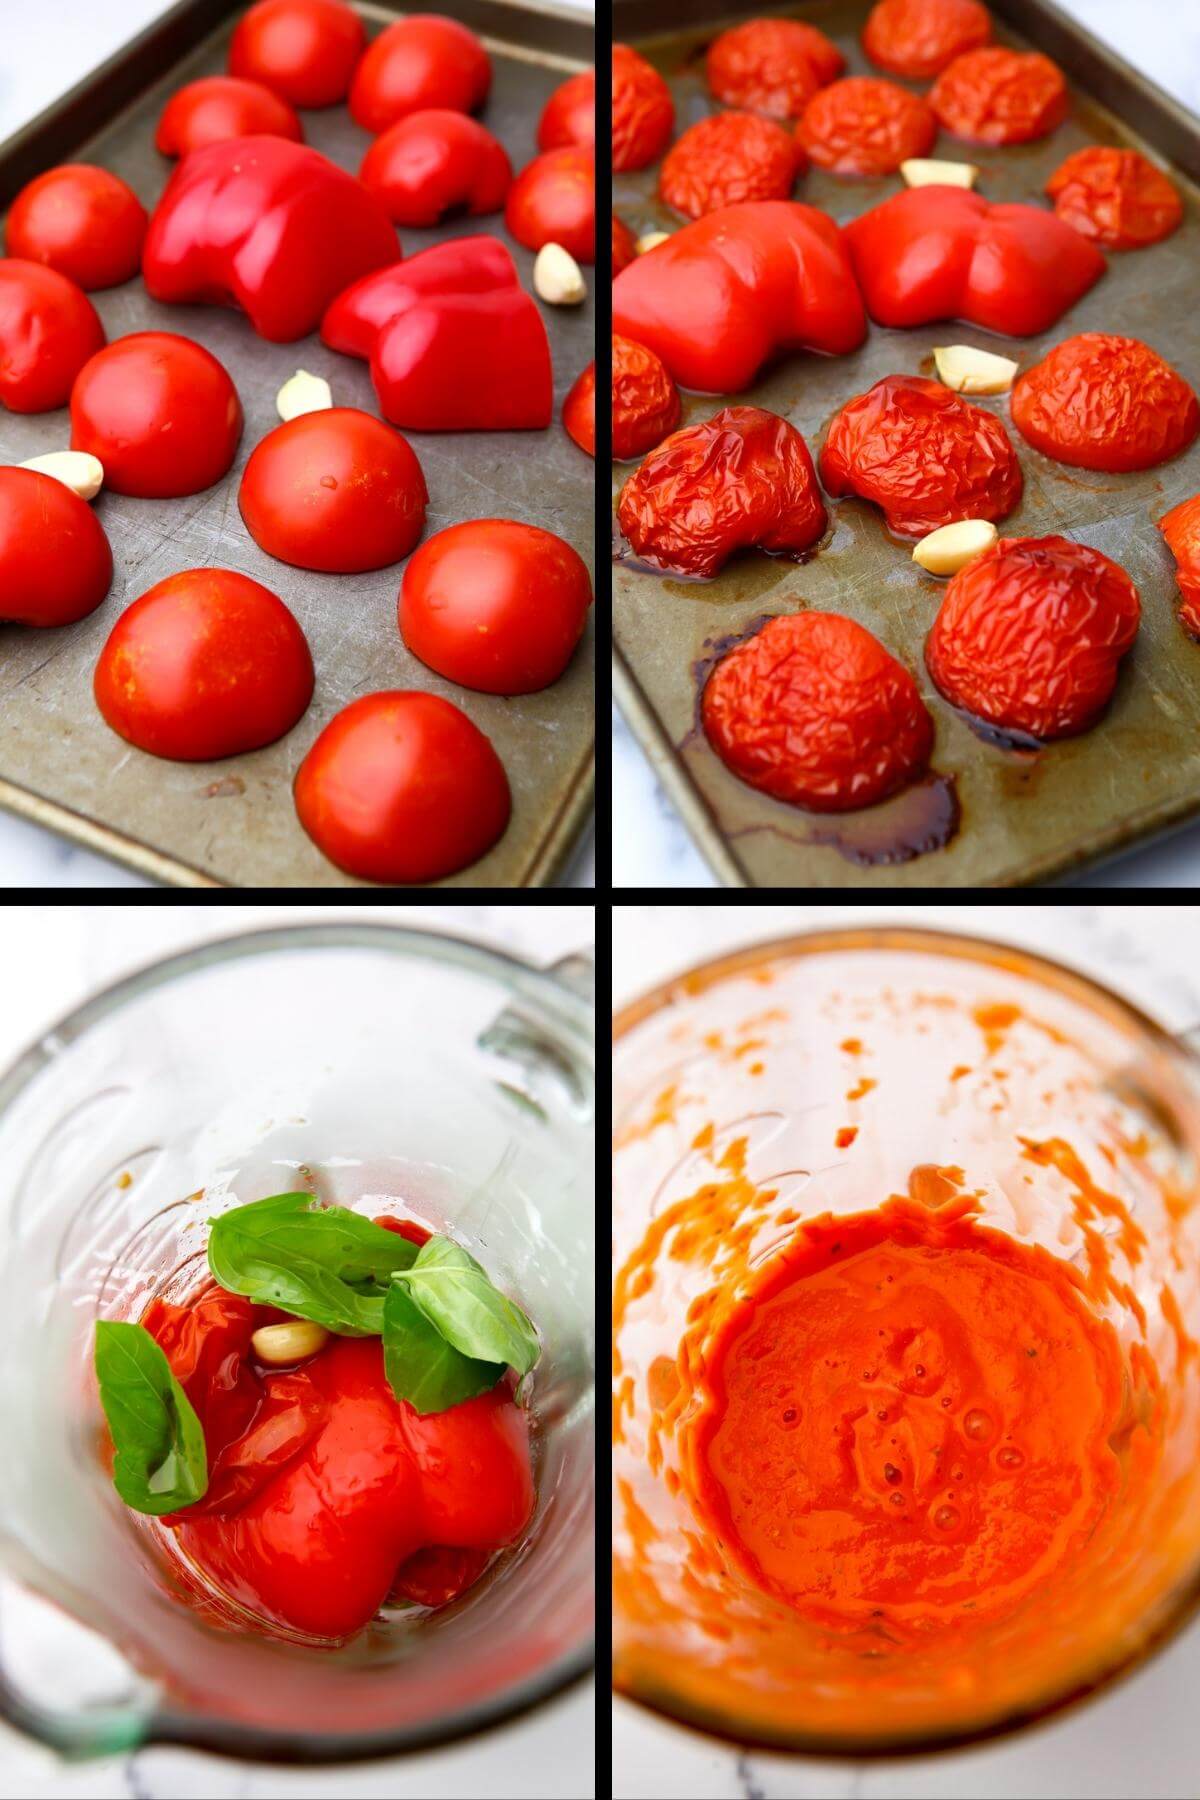 A collage of 4 images showing roasting tomaotes and a red pepper on a cookie sheet then blending it into a pasta sauce.